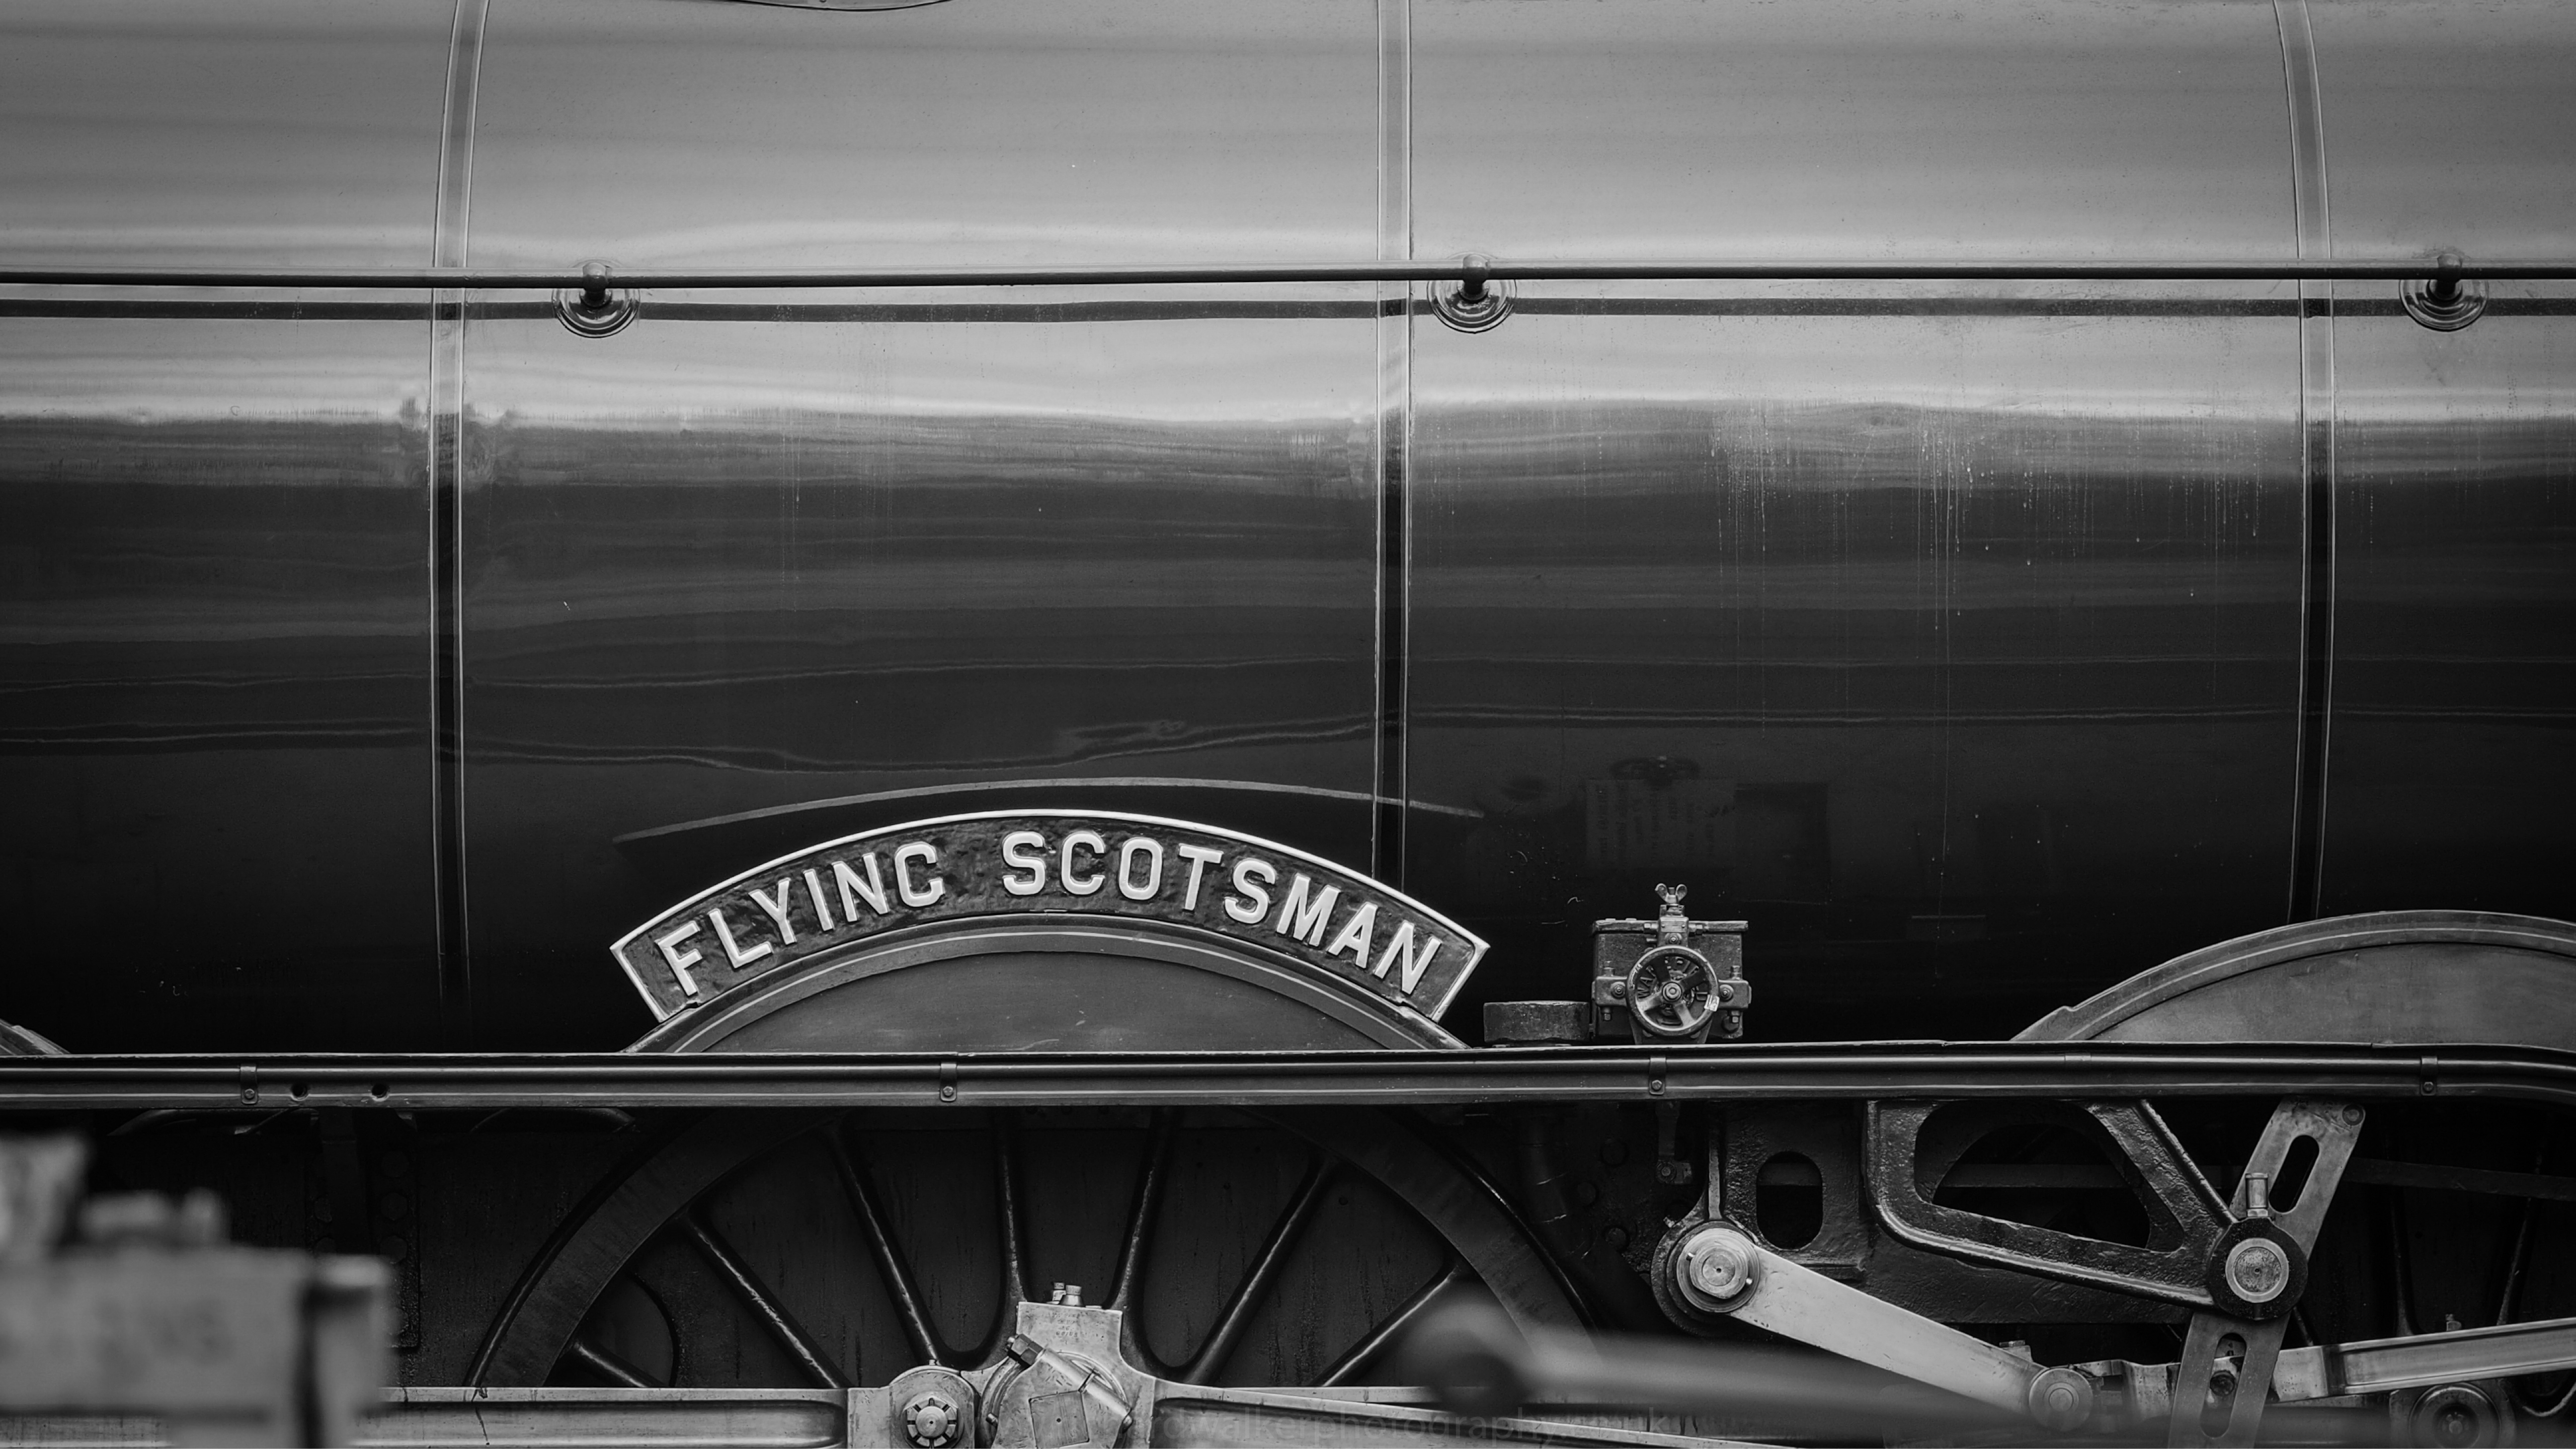 The Flying Scotsman nameplate in black and white